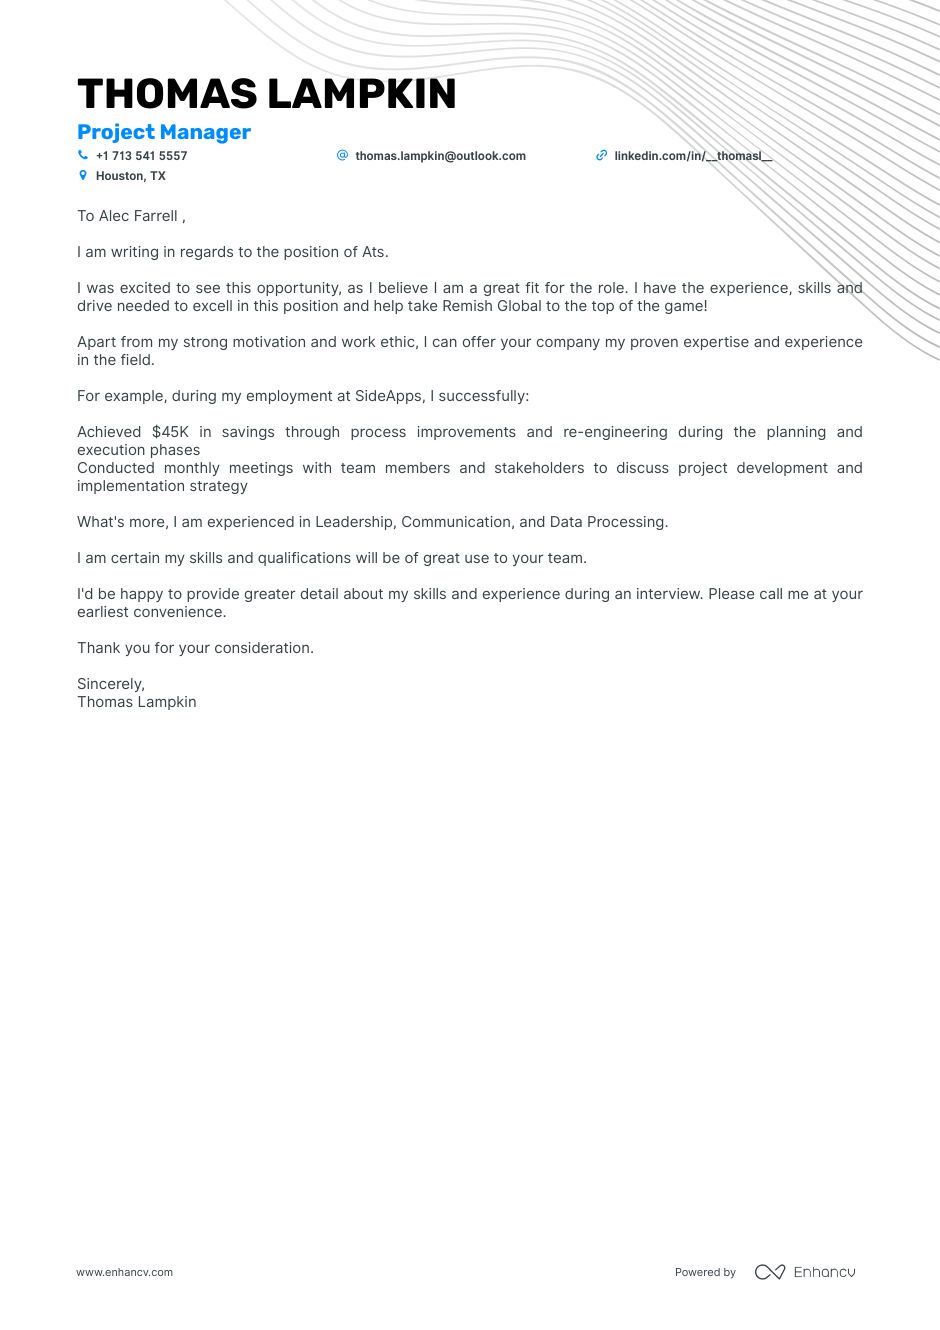 ats-coverletter.png